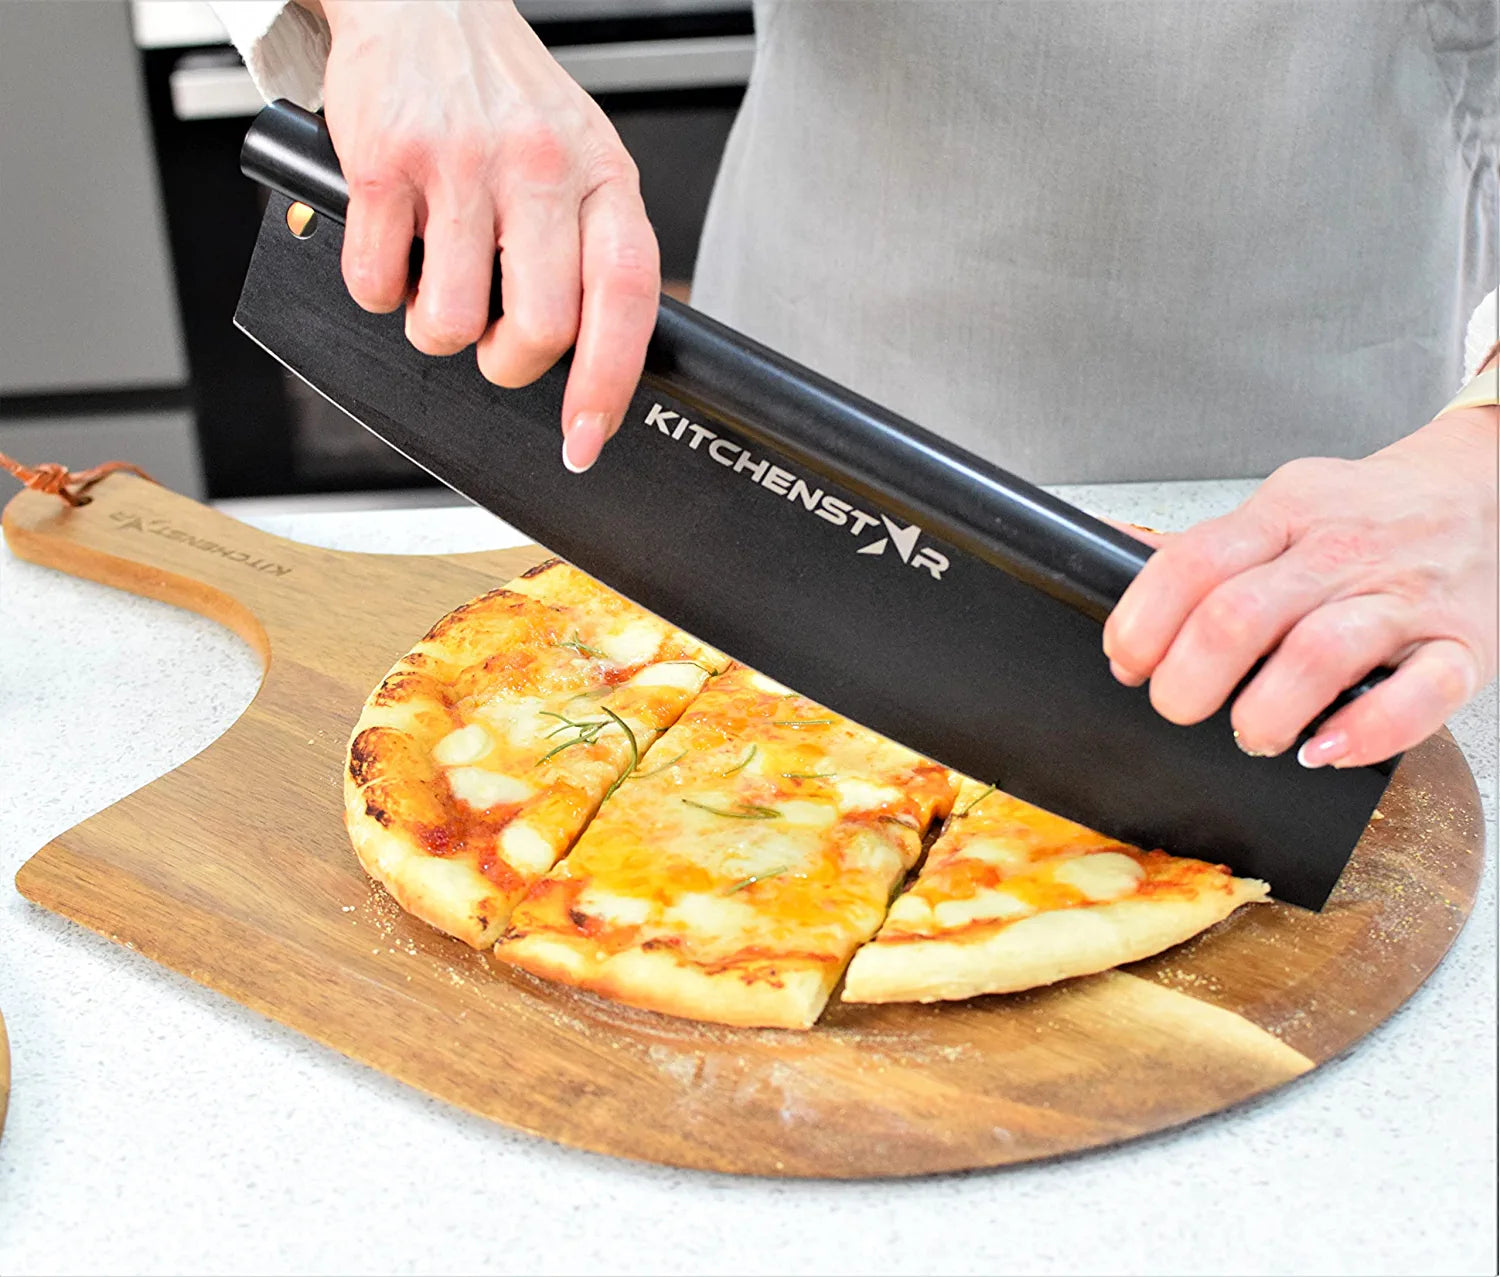 18" Black Non-Stick Pizza Cutter by KitchenStar | Sharp Stainless Steel Slicer Knife - Rocker Style w Blade Cover | Chop and Slices Perfect Portions + Dishwasher Safe – Premium Pizza Oven Accessories